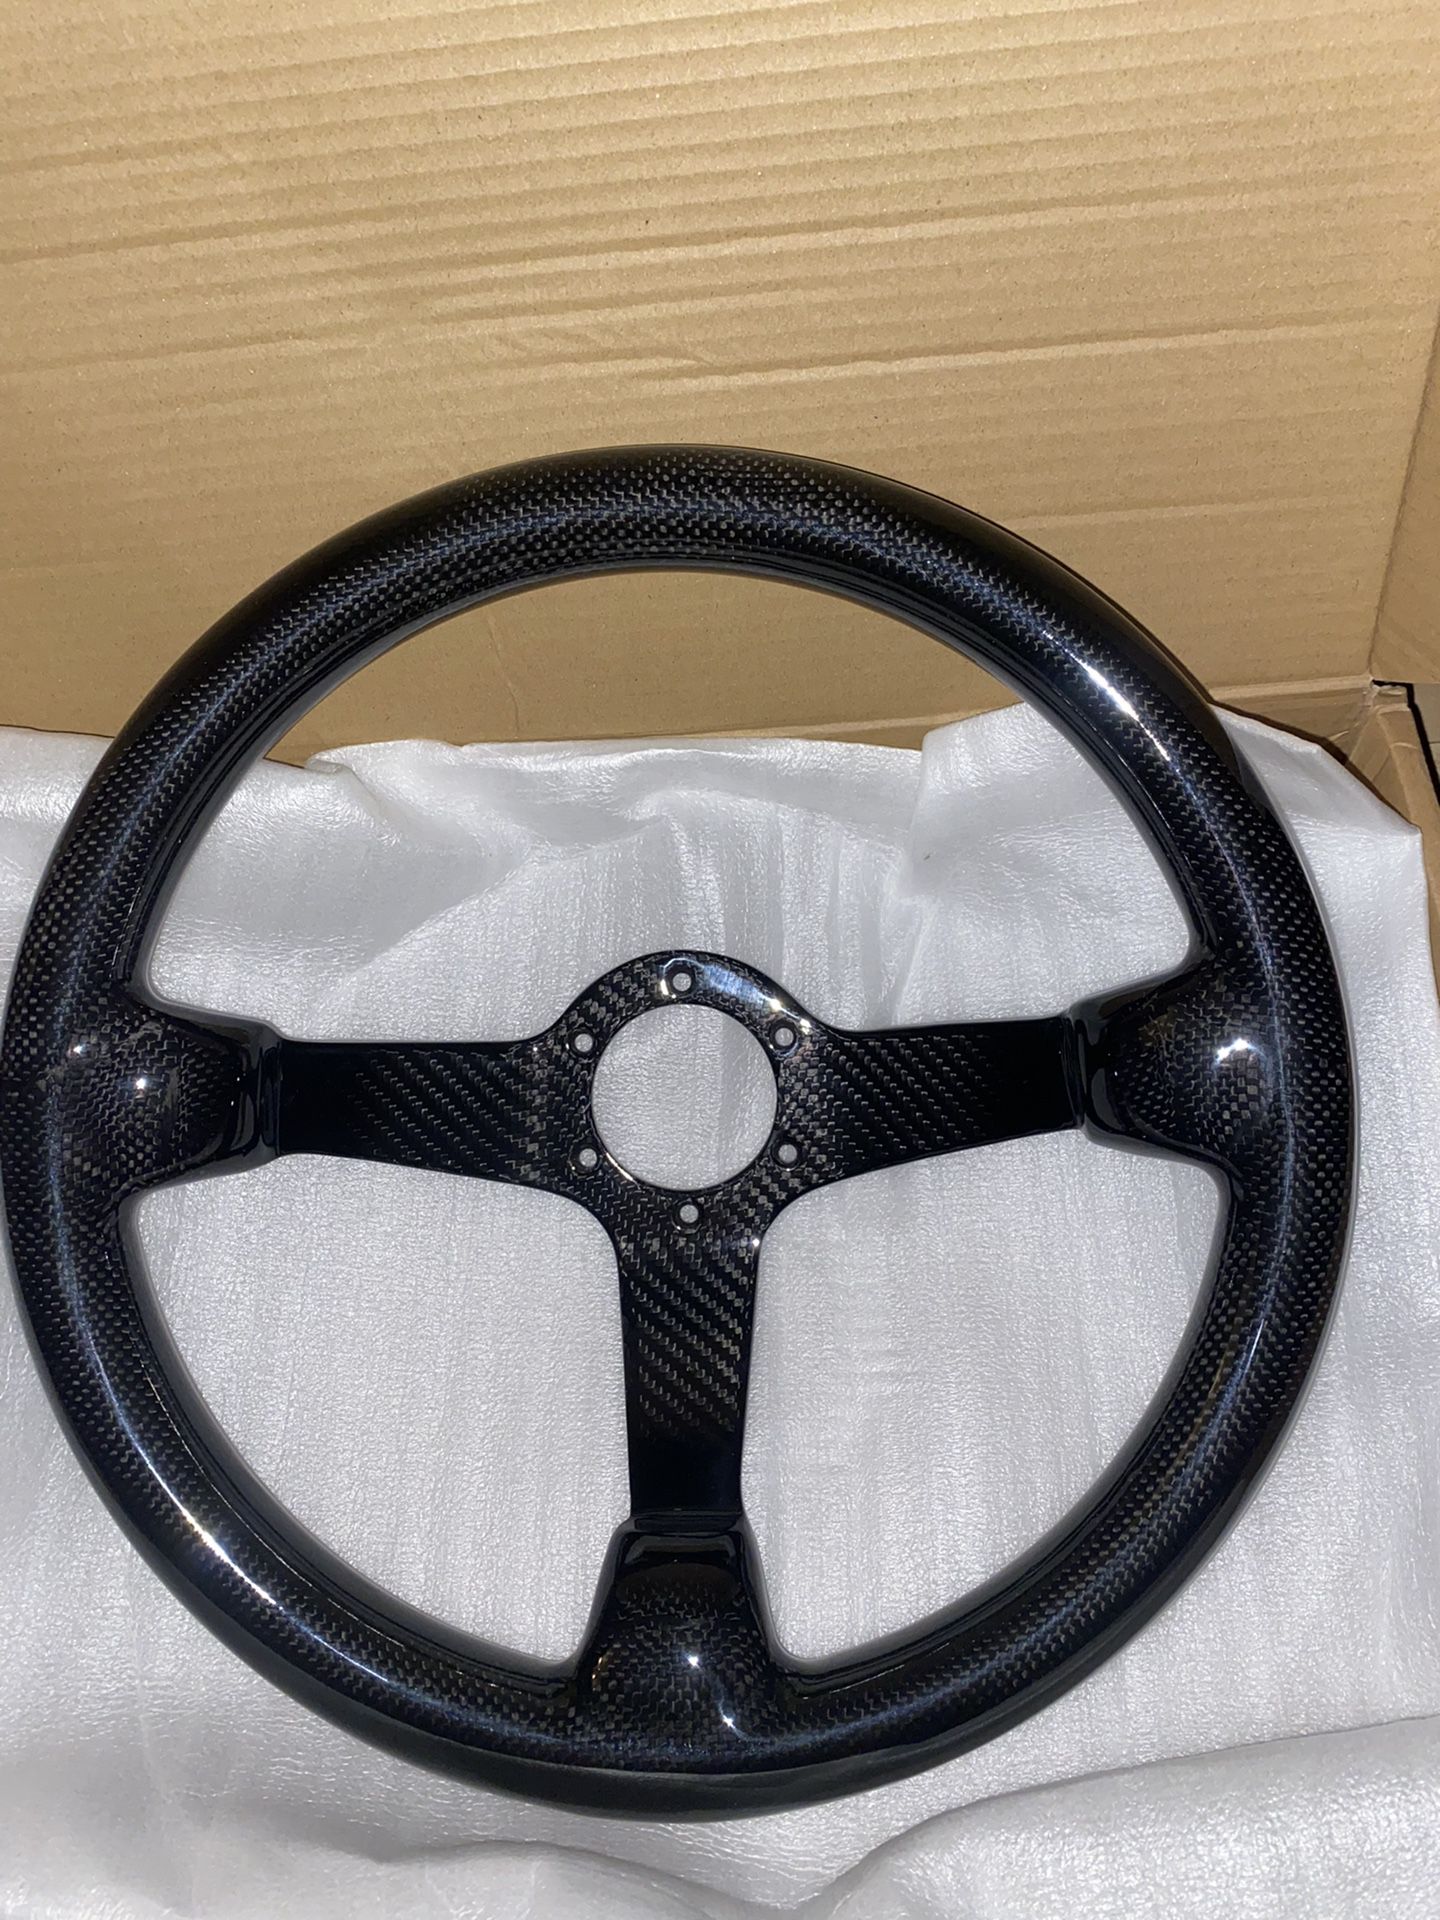 Full Carbon Steering Wheel (350mm) 350z Parts, G35 Parts, Civic Parts 